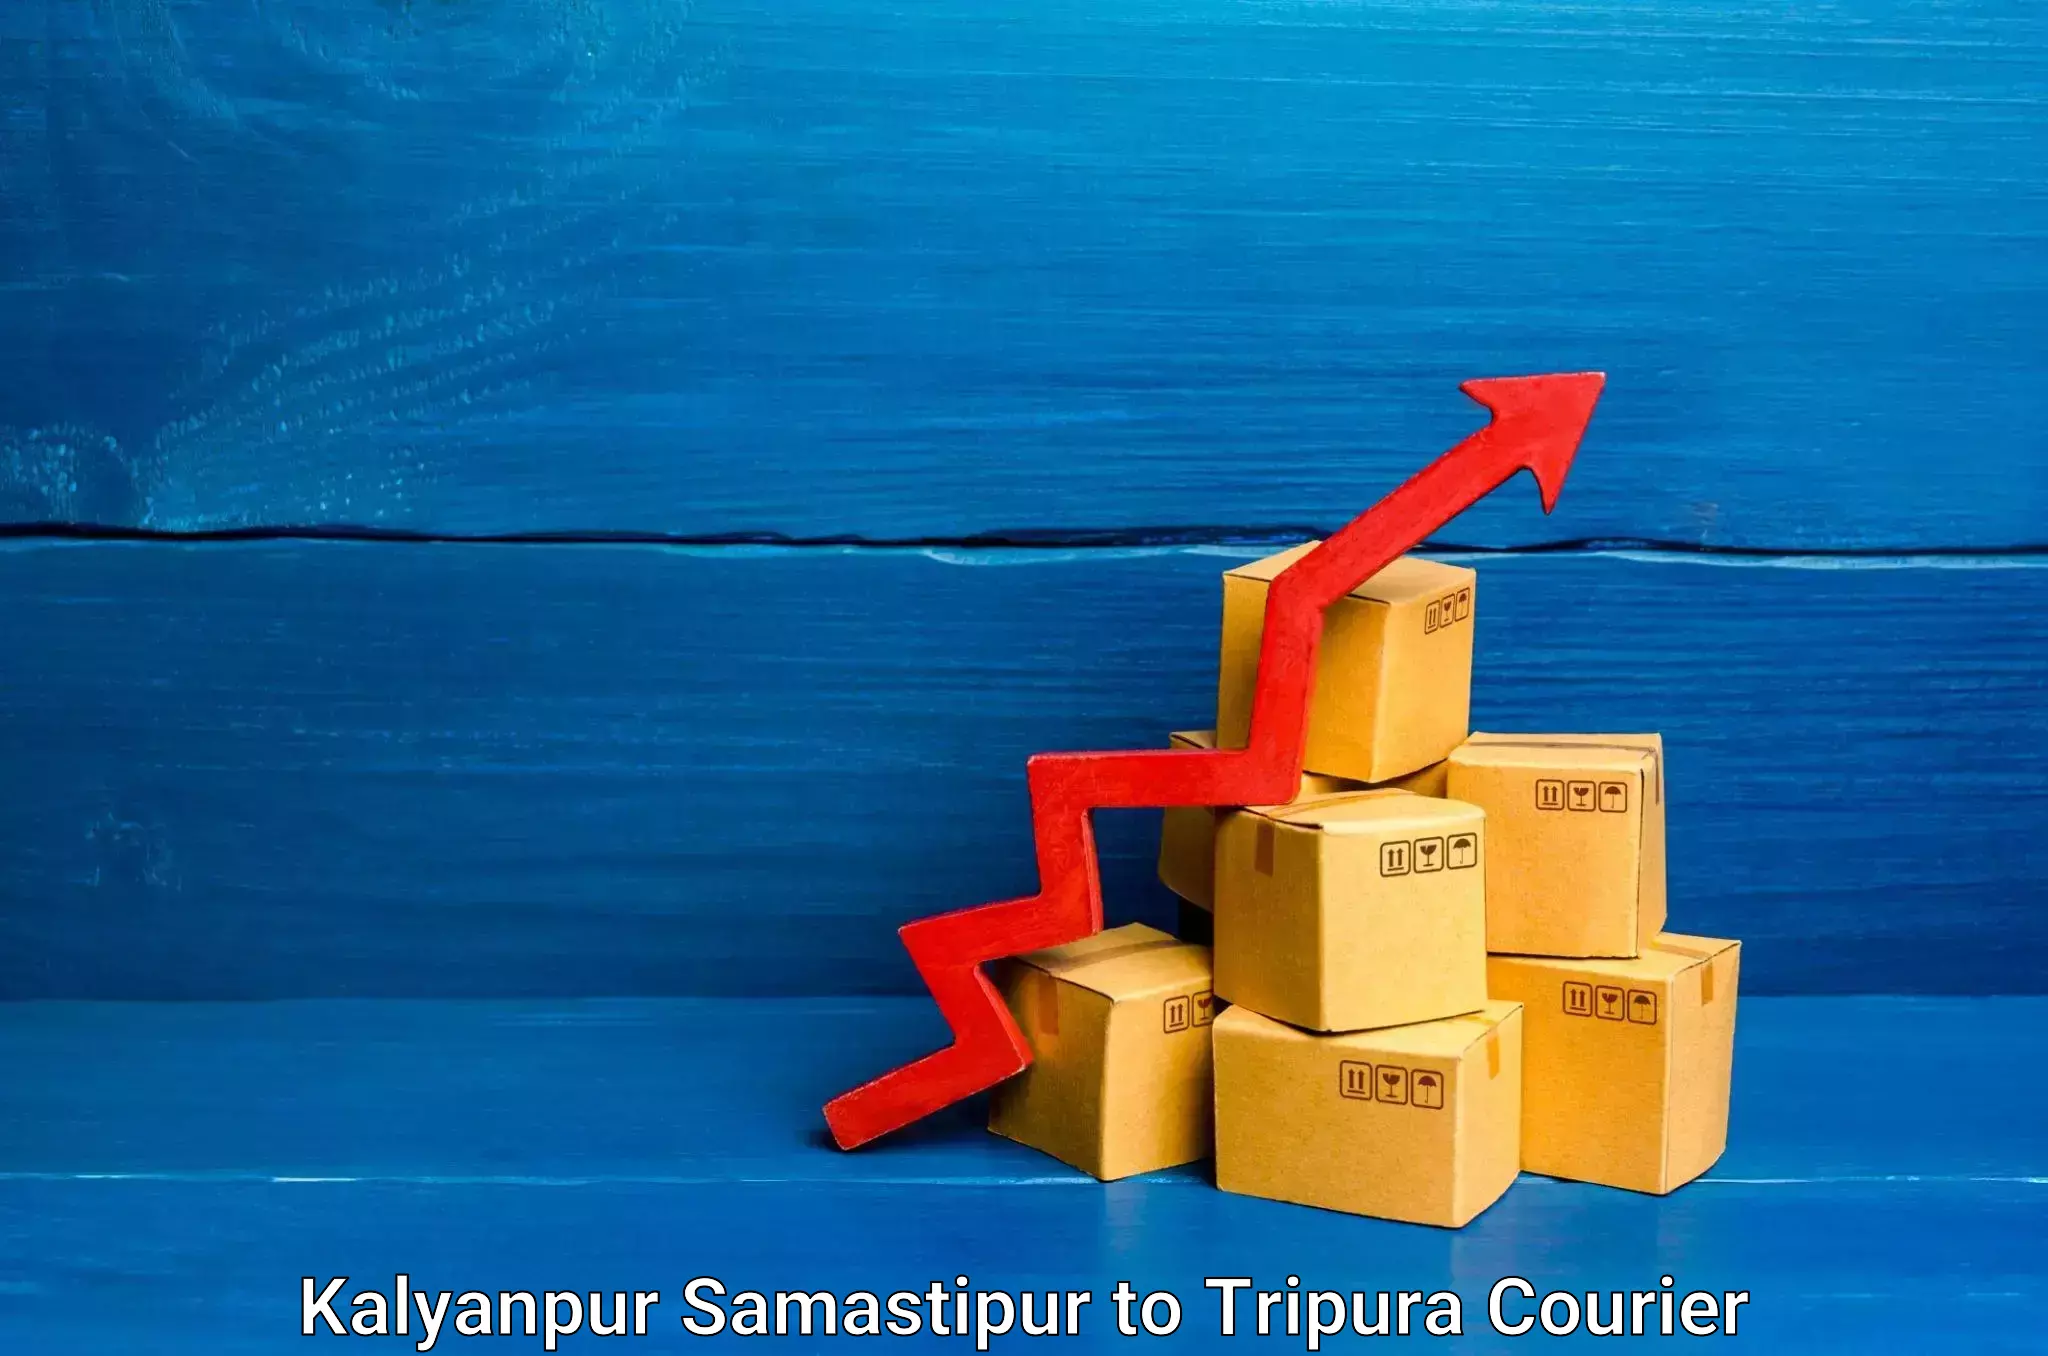 Full-service movers in Kalyanpur Samastipur to Udaipur Tripura